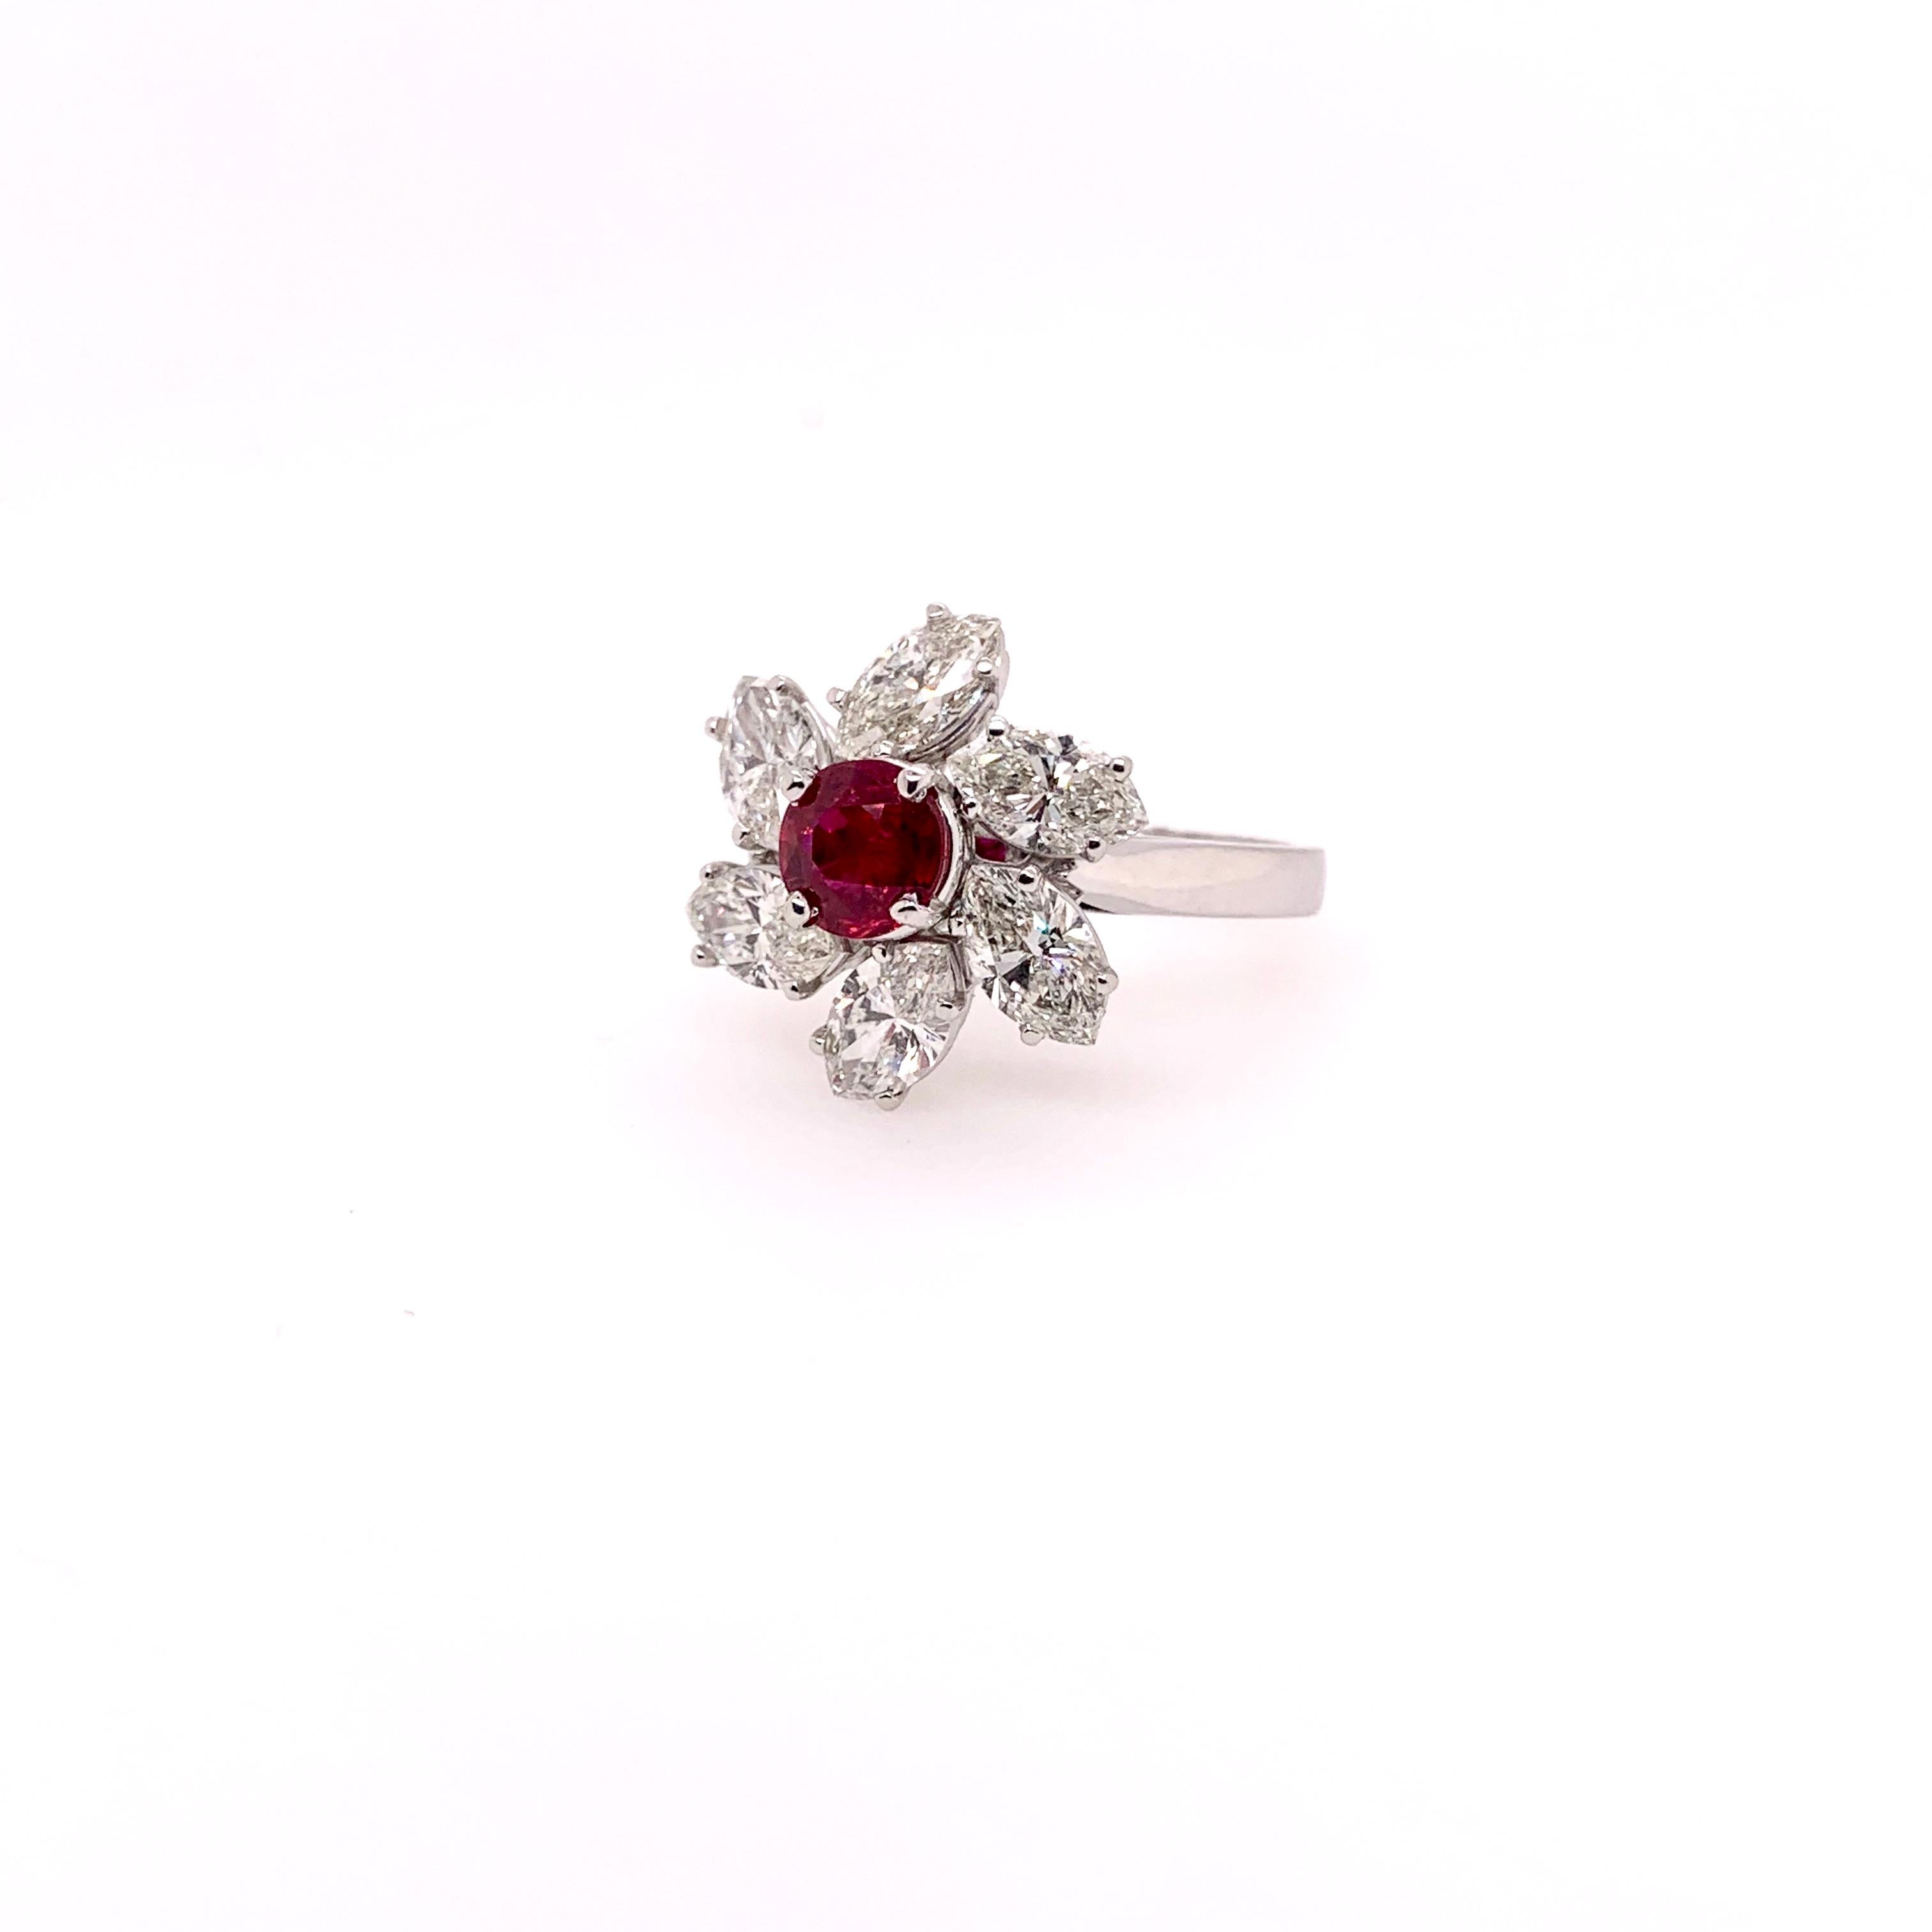 This stunning GIA certified heated ruby is the focal point in this mesmerizing custom setting in 18k white gold.  The large marquis diamonds weighs 2.75 carats and  surround the ruby like a pinwheel motif.  The ruby is 1.14 carat and has a deep,